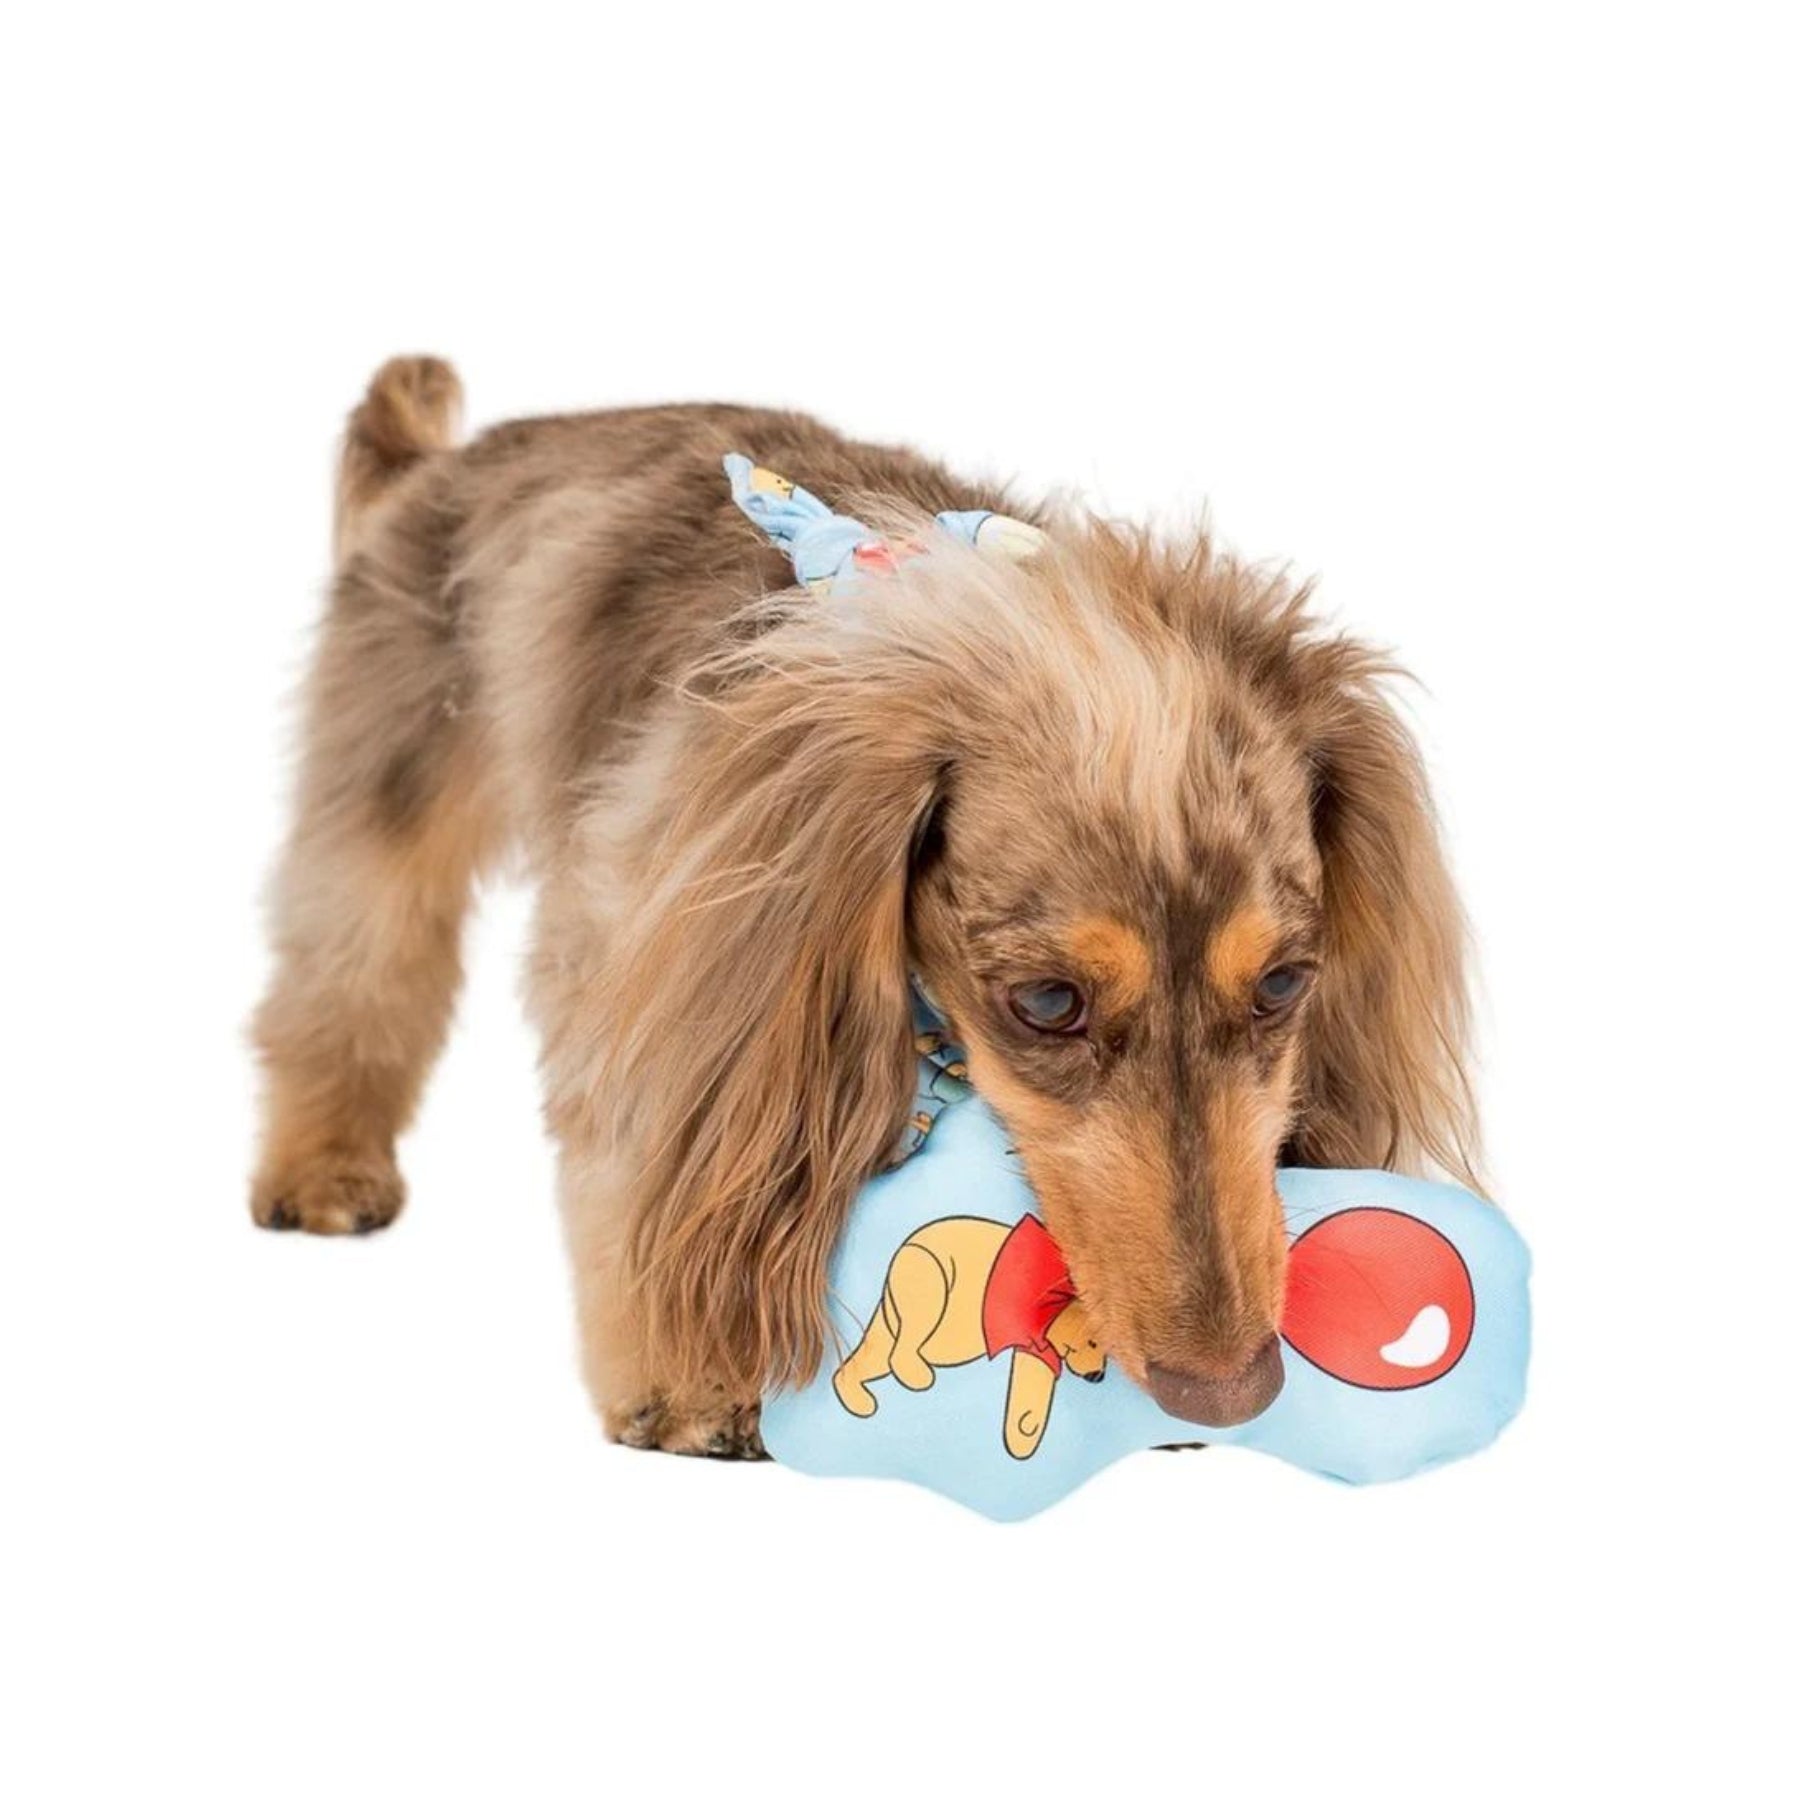 Pooh's Balloons Squeaky Toy - Pooch Luxury